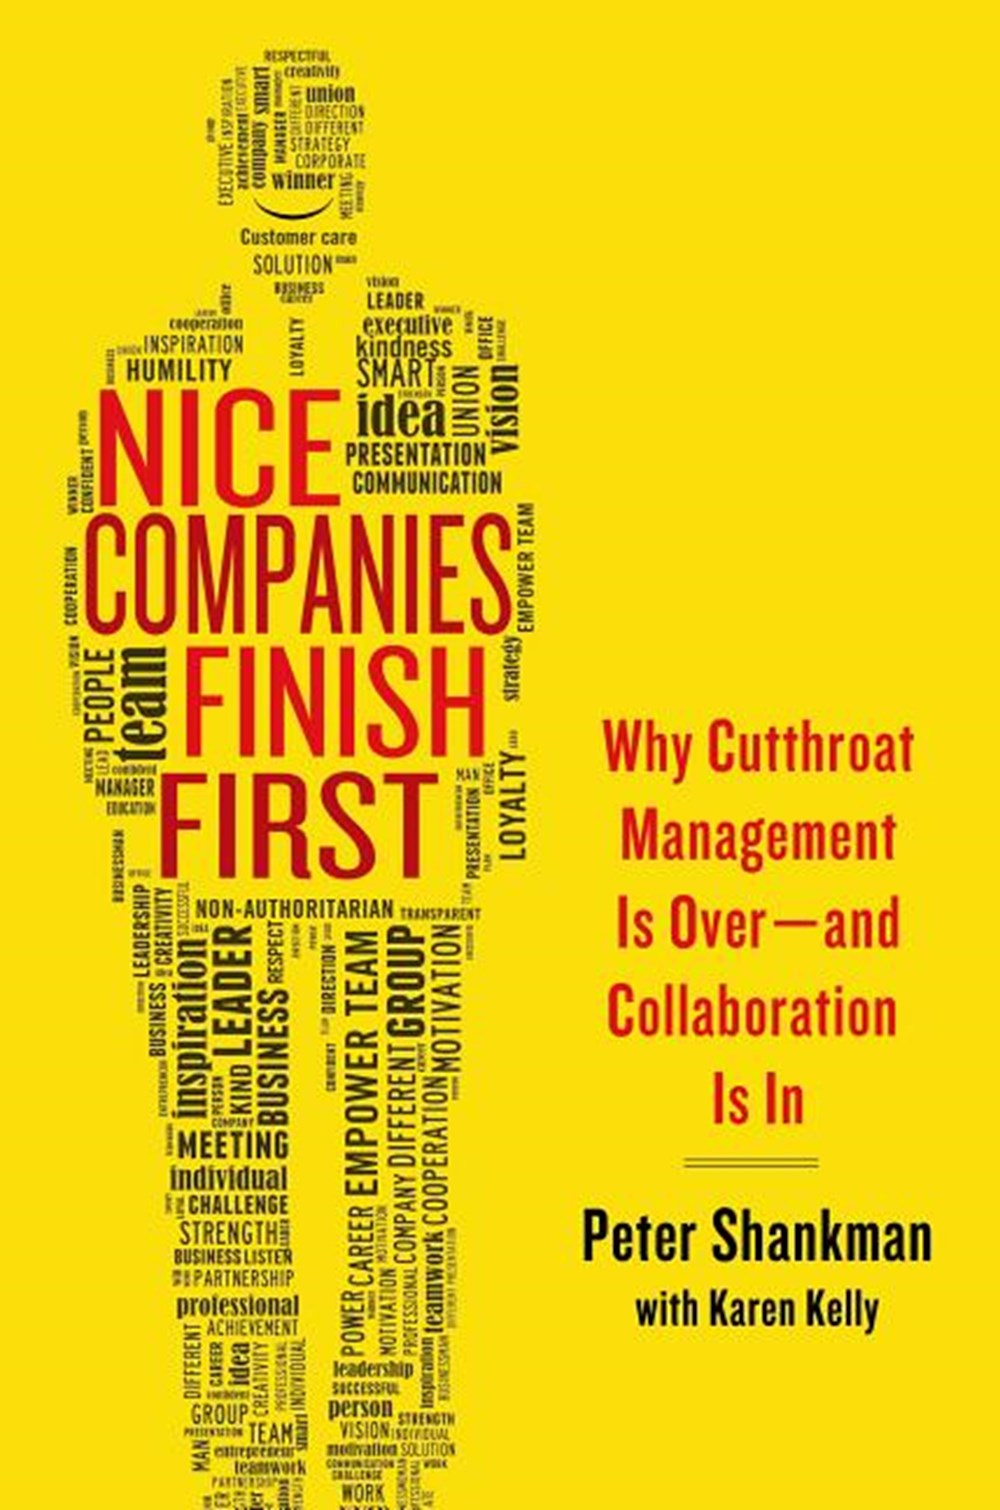 Nice Companies Finish First Why Cutthroat Management Is Over--And Collaboration Is in